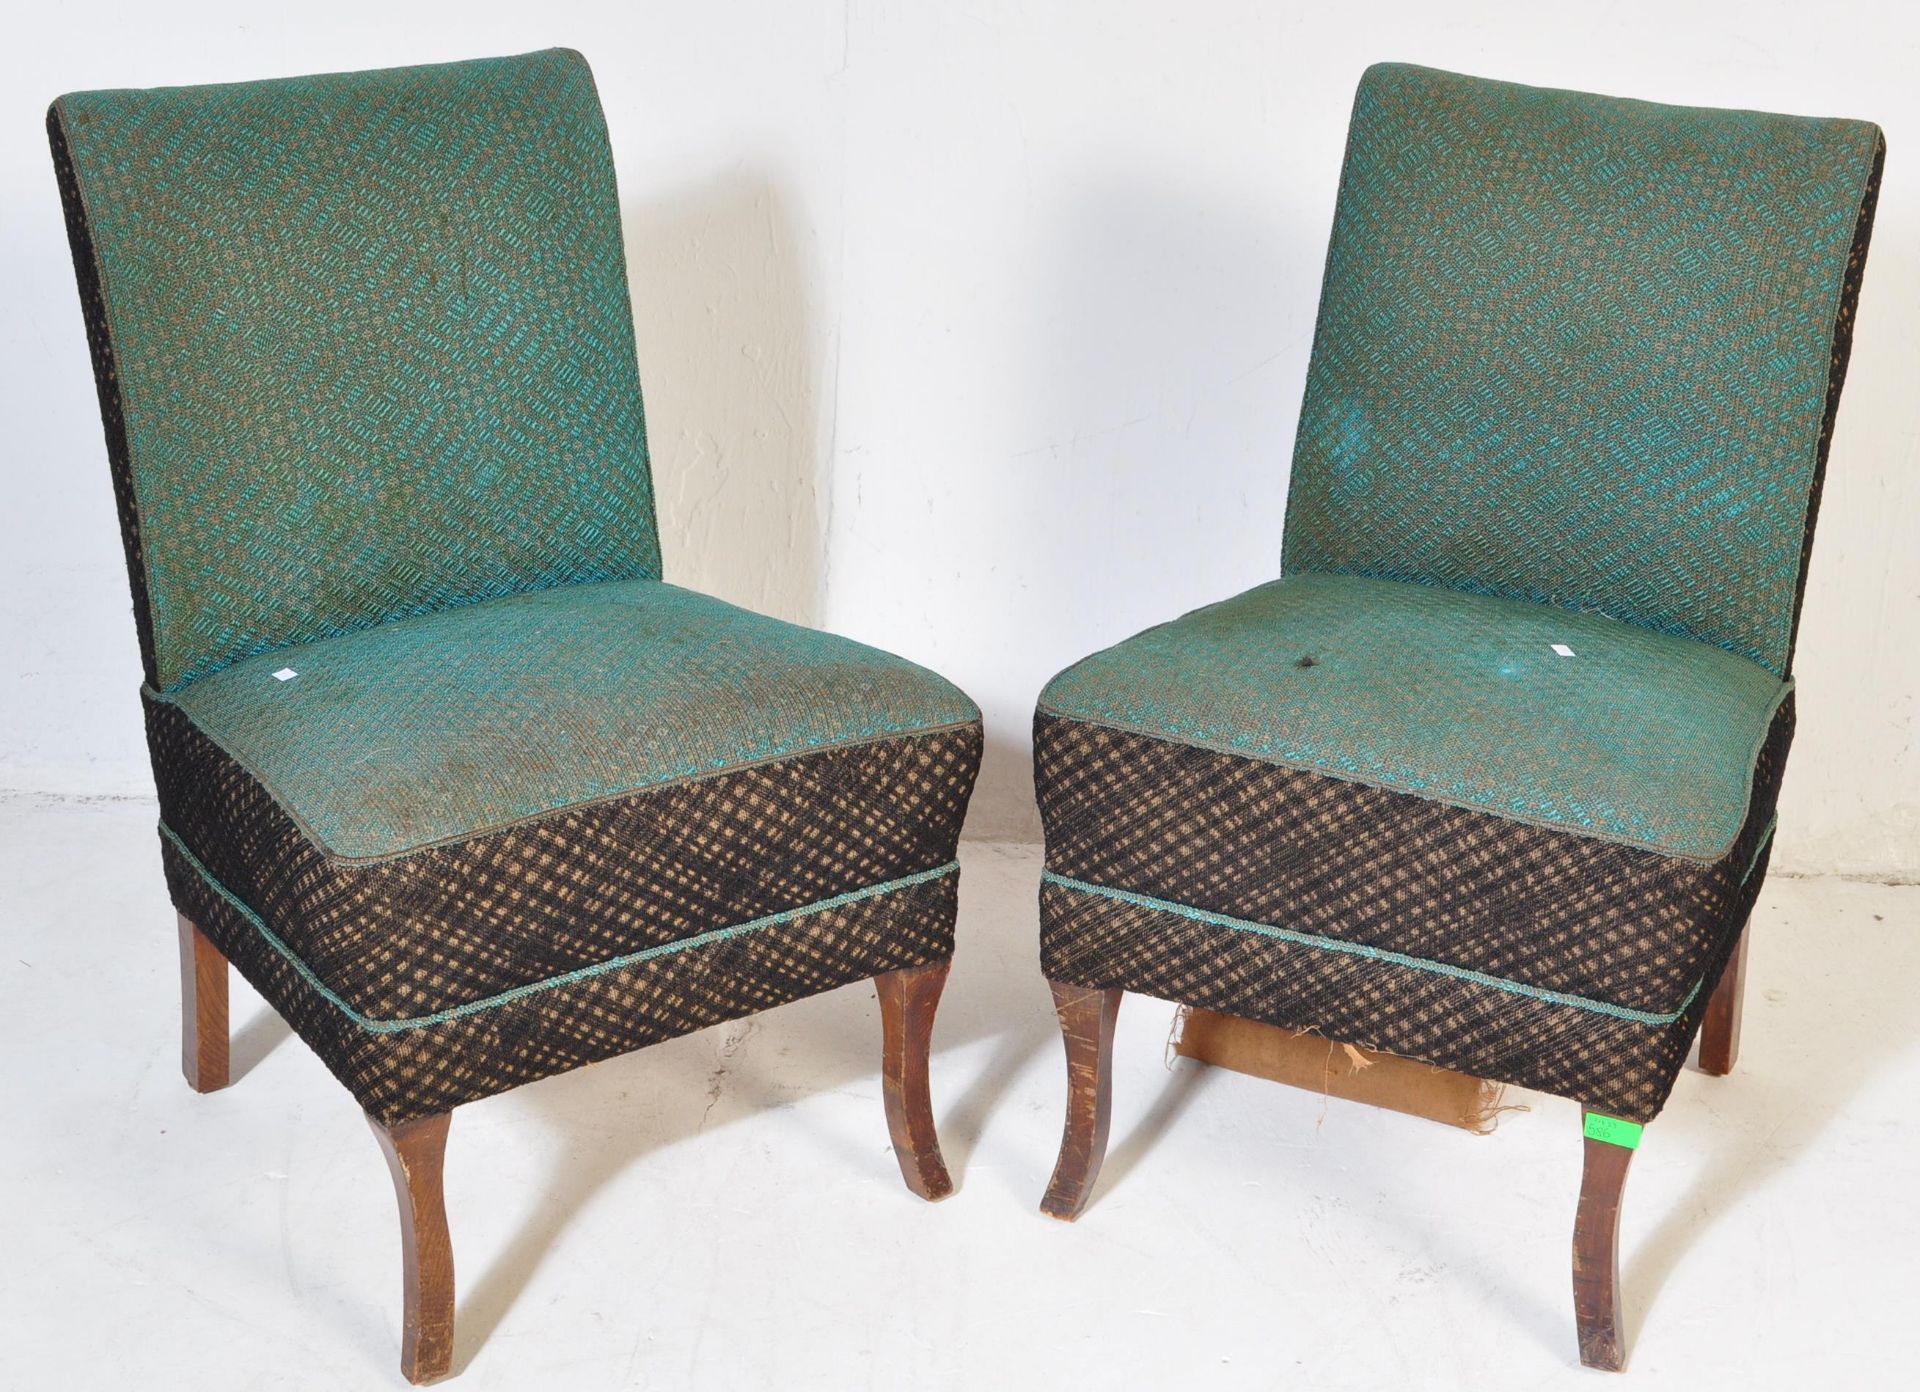 VINTAGE 20TH CENTURY CIRCA 1940S COCTAIL CHAIRS - Image 2 of 5